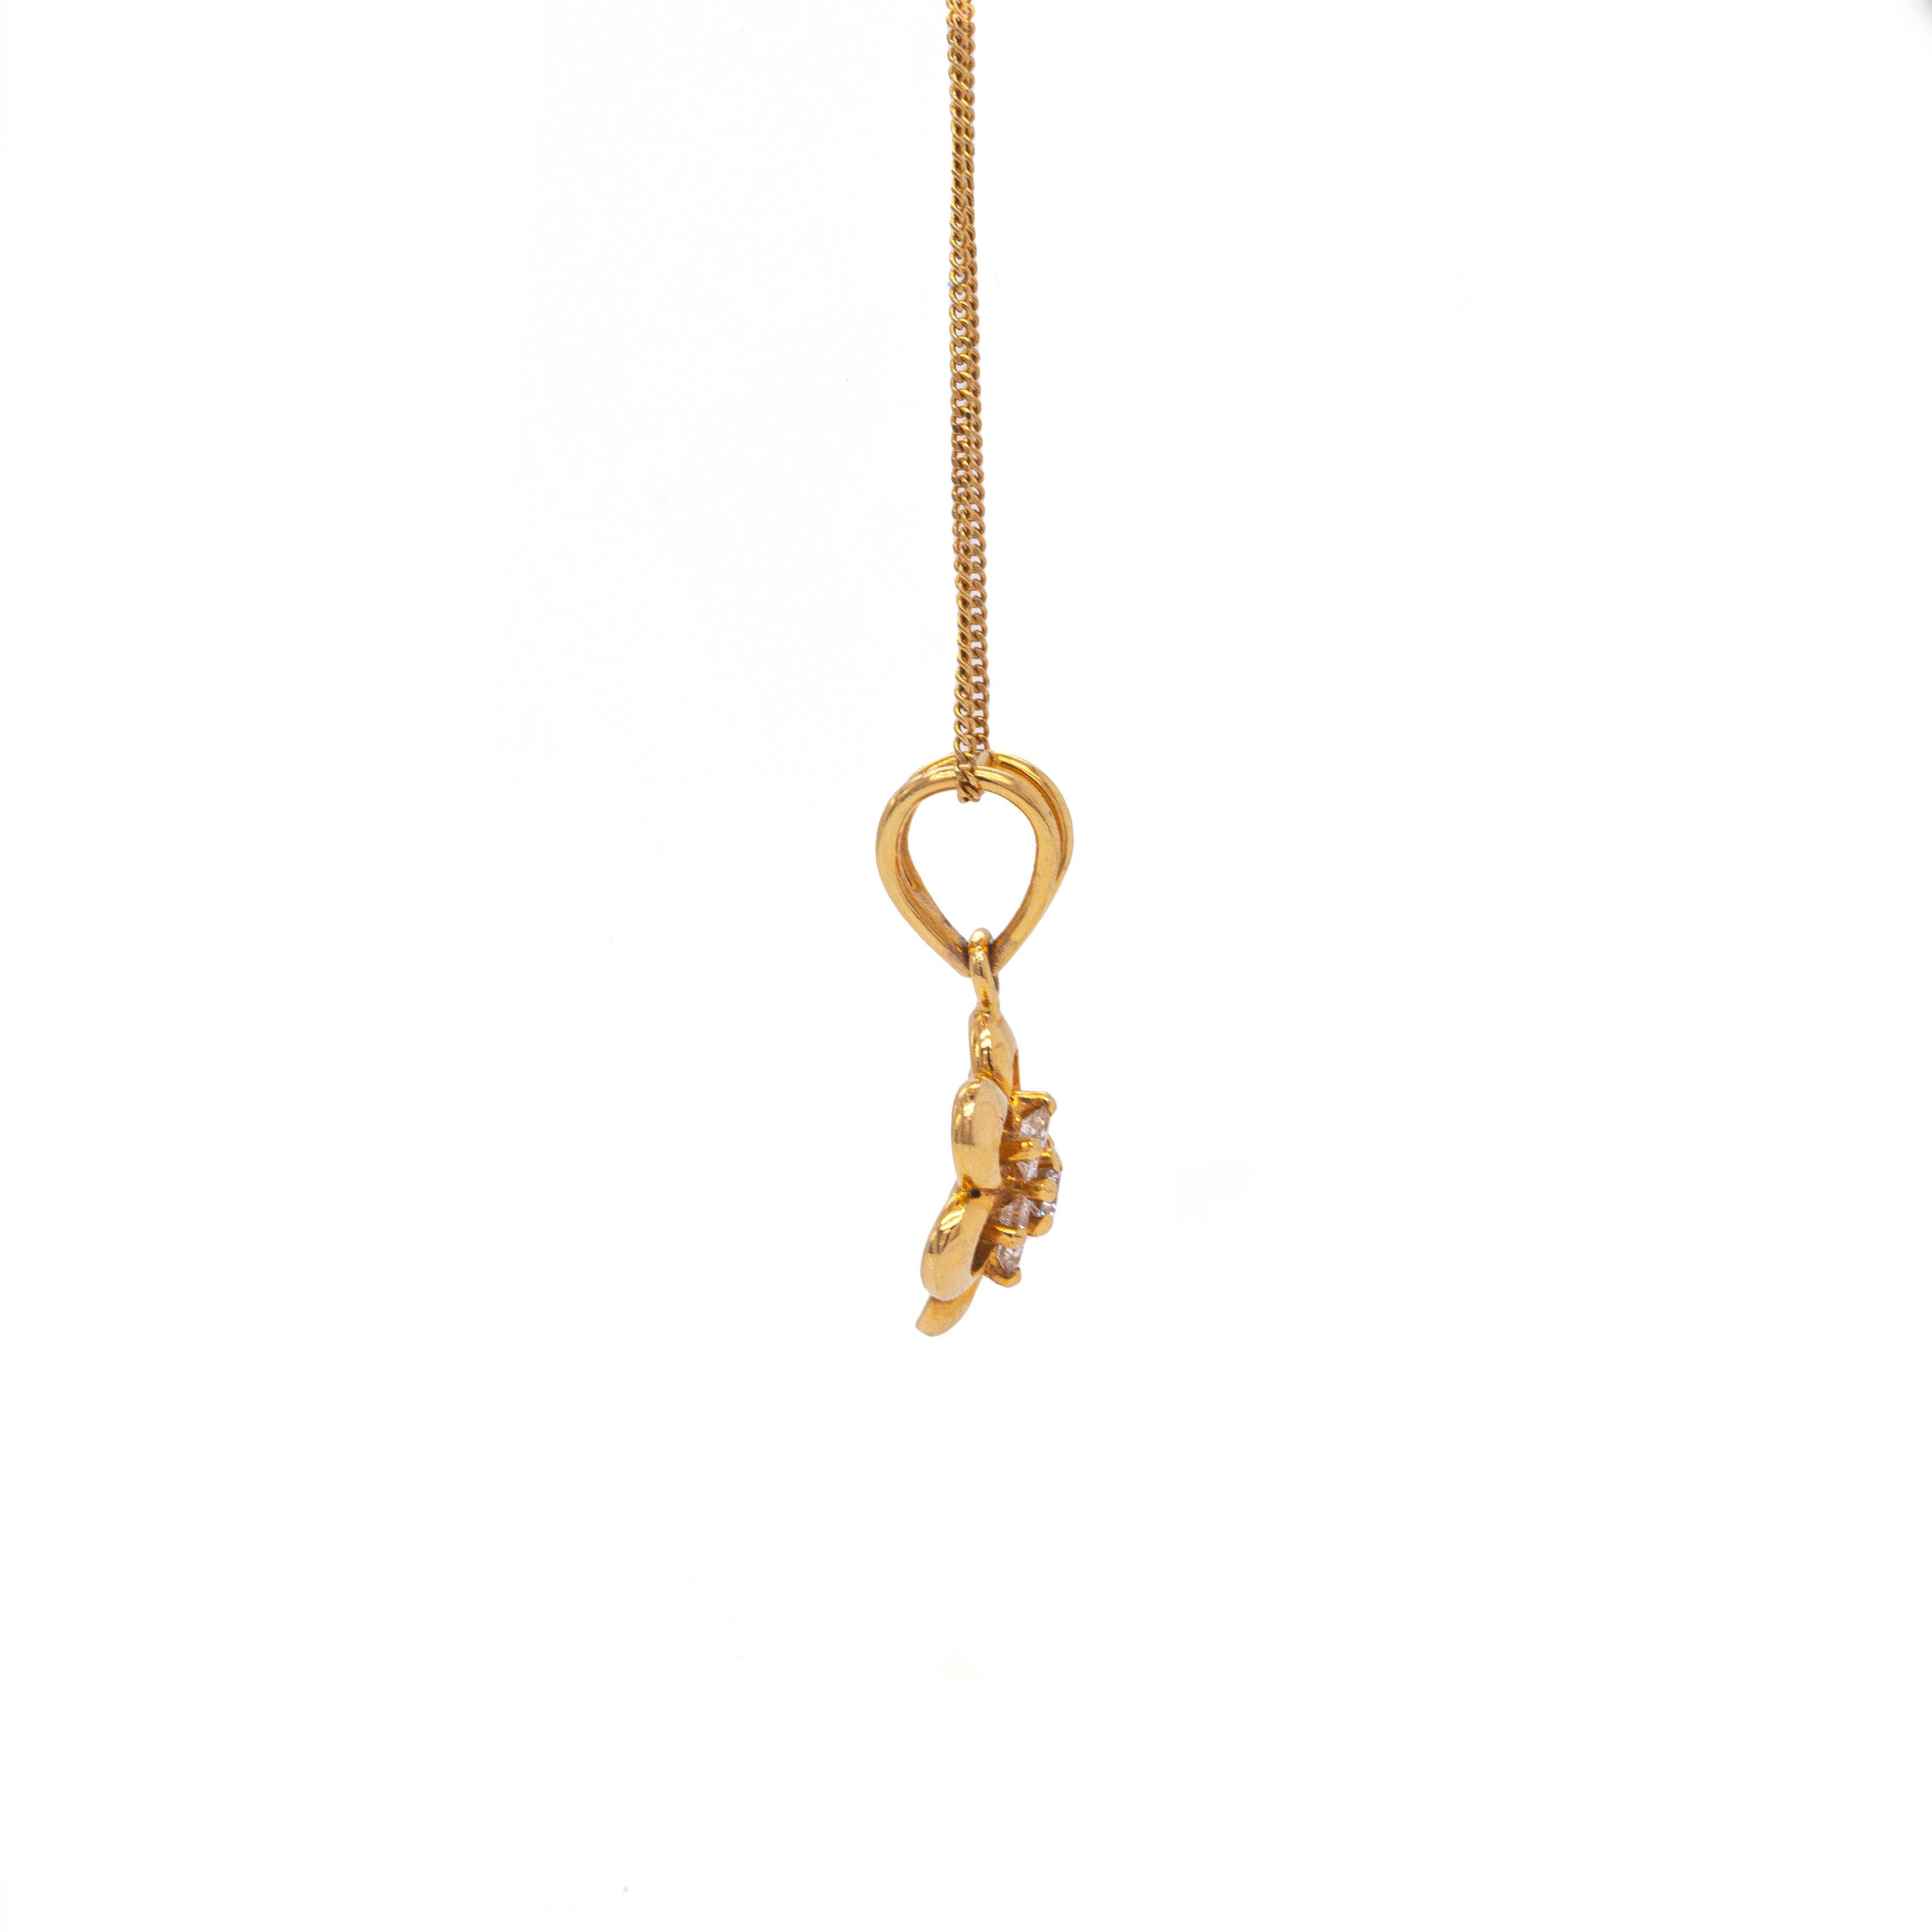 This lovely pendant portrays a delicate daisy flower designed with slightly curved openwork petals, finely crafted in 18 carat yellow gold.

A wonderful cluster of 7 fine quality round brilliant cut diamonds, weighing approximately 0.30ct combined,